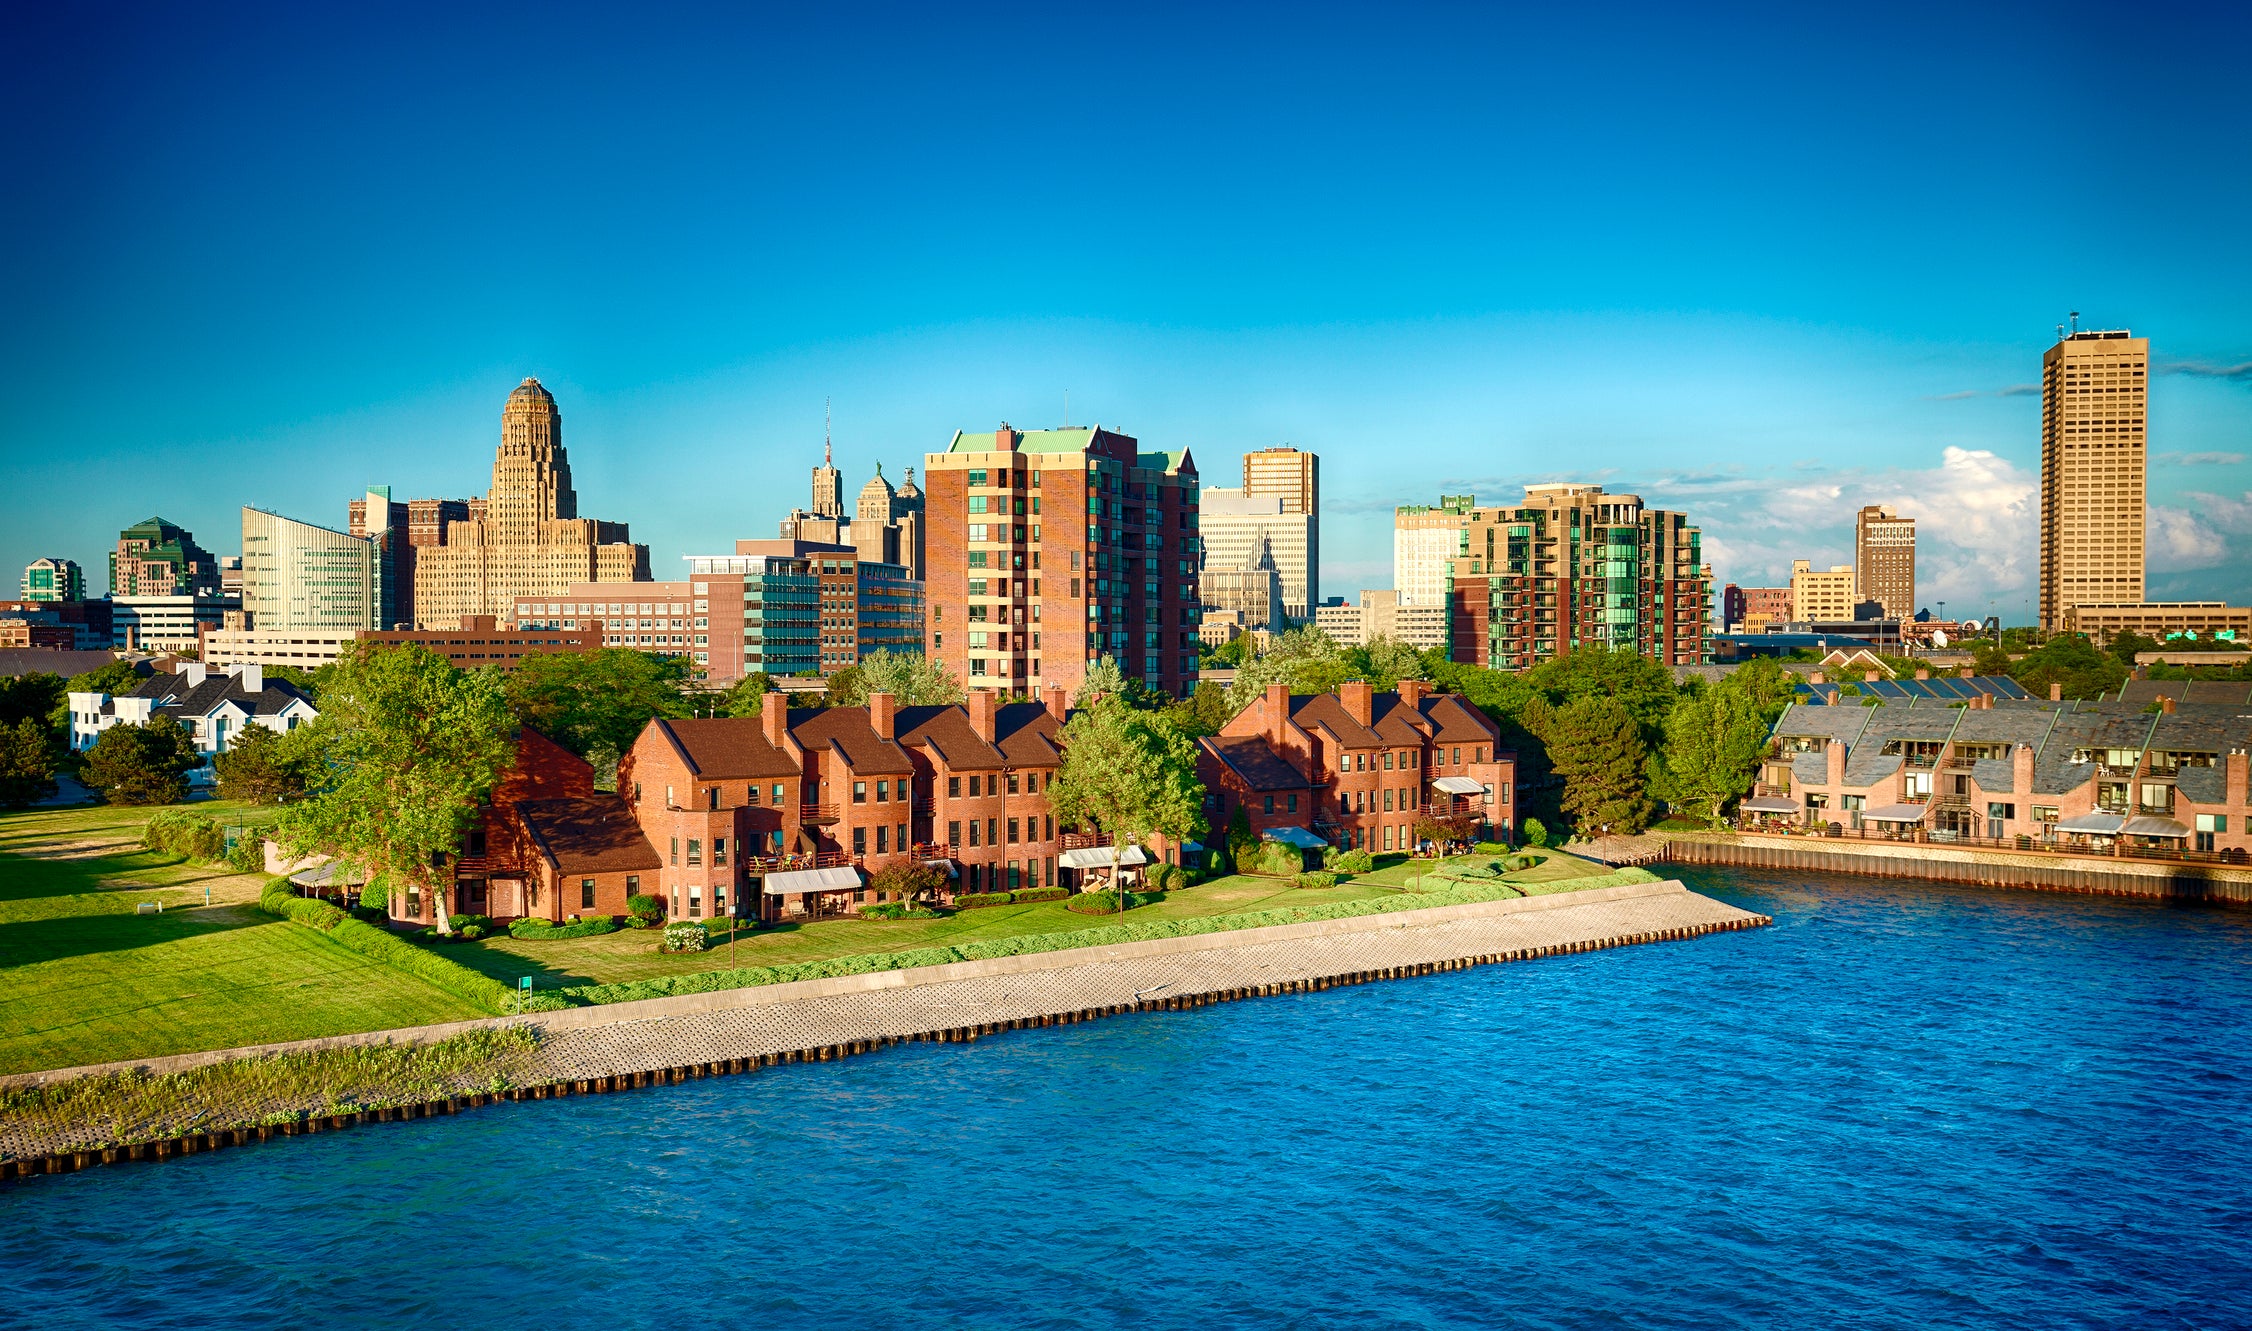 Buffalo, New York, saw one of the largest increases in house prices over the past year